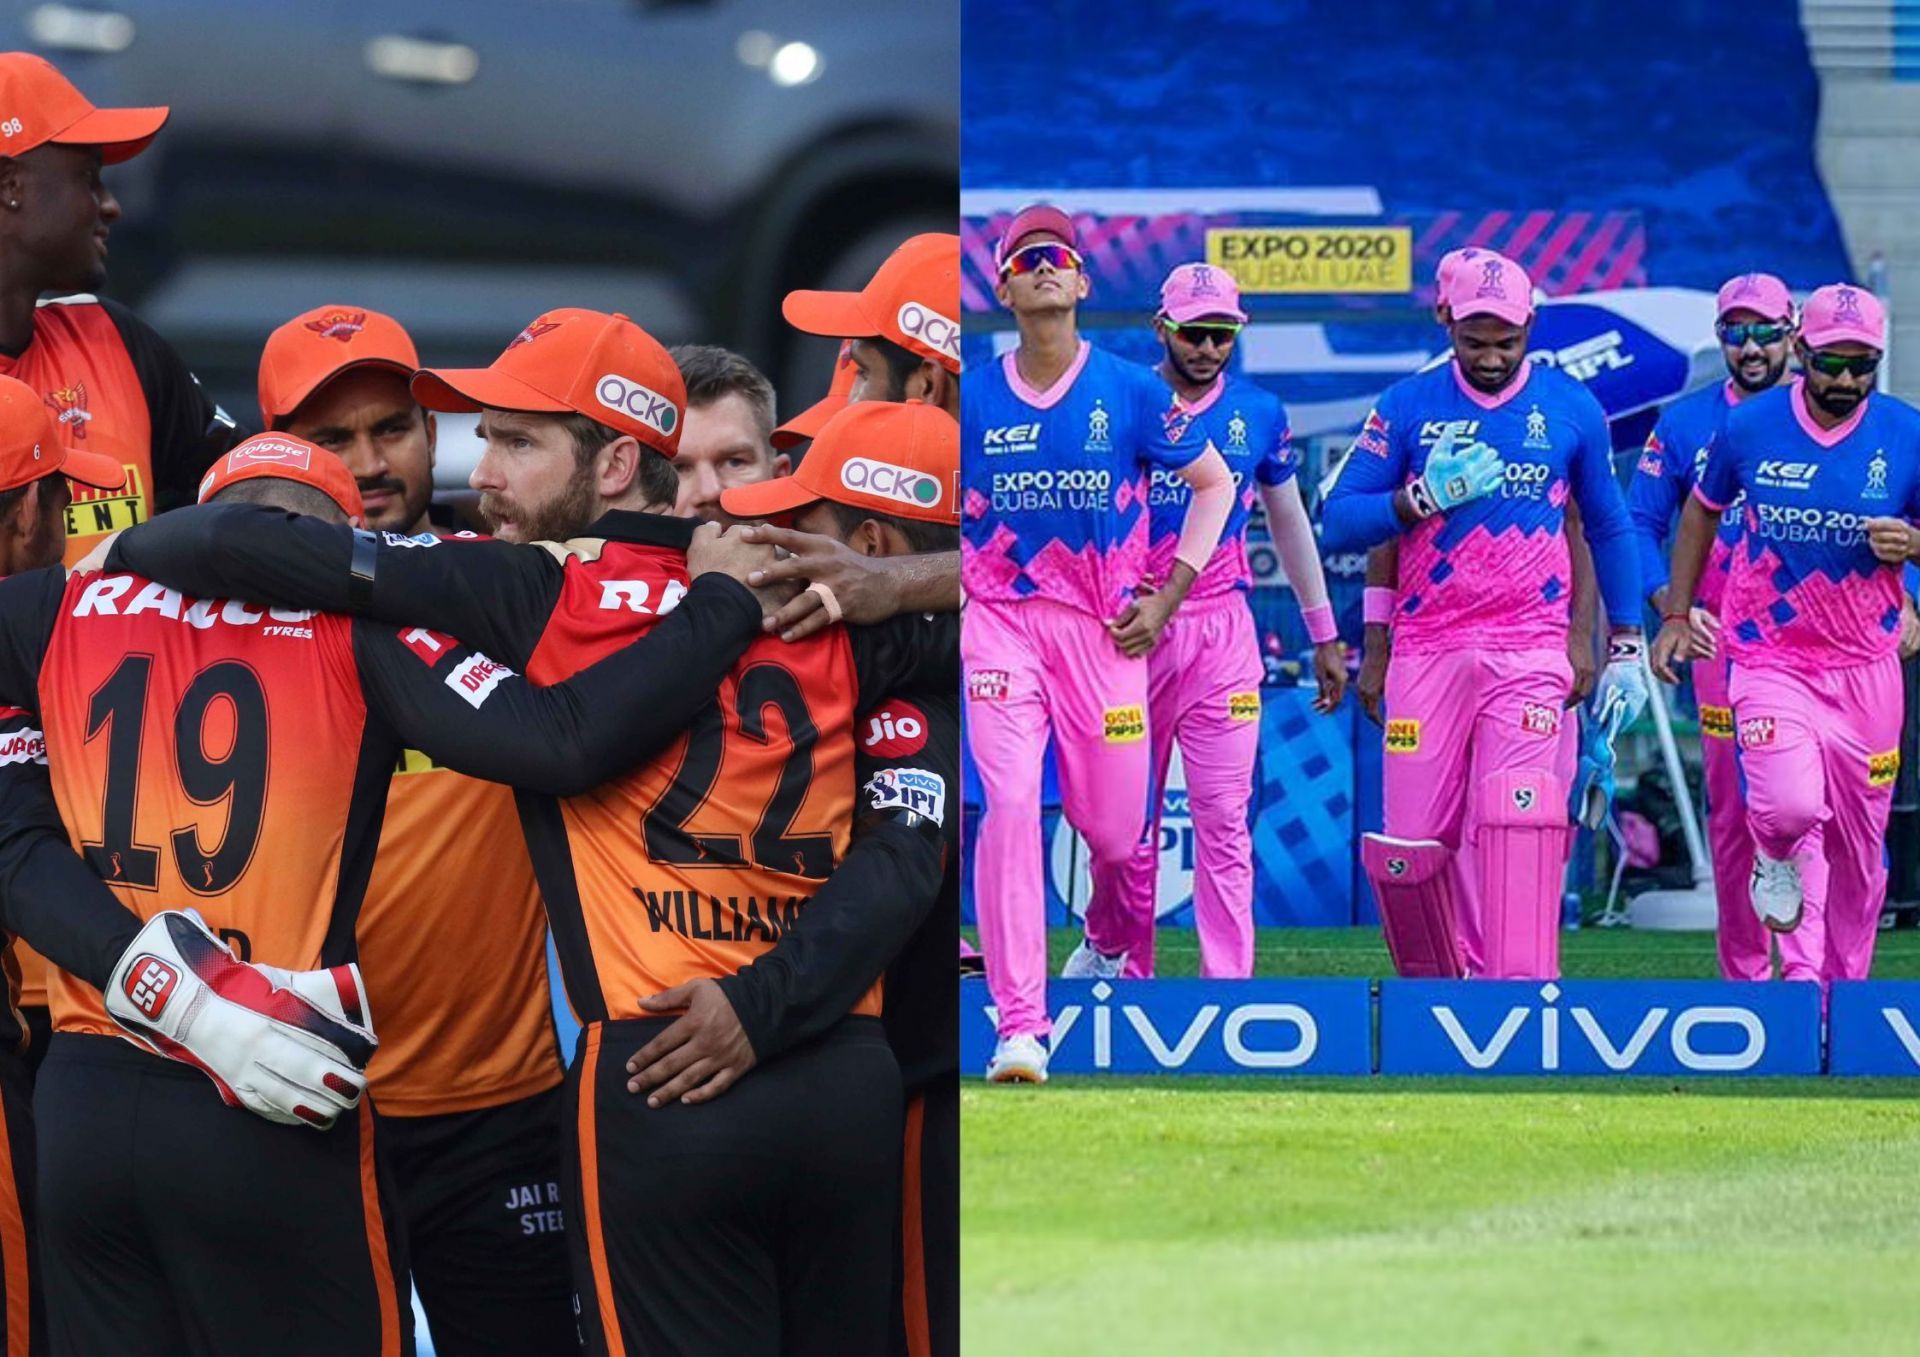 These three teams could have a better auction ahead of the coming IPL season.